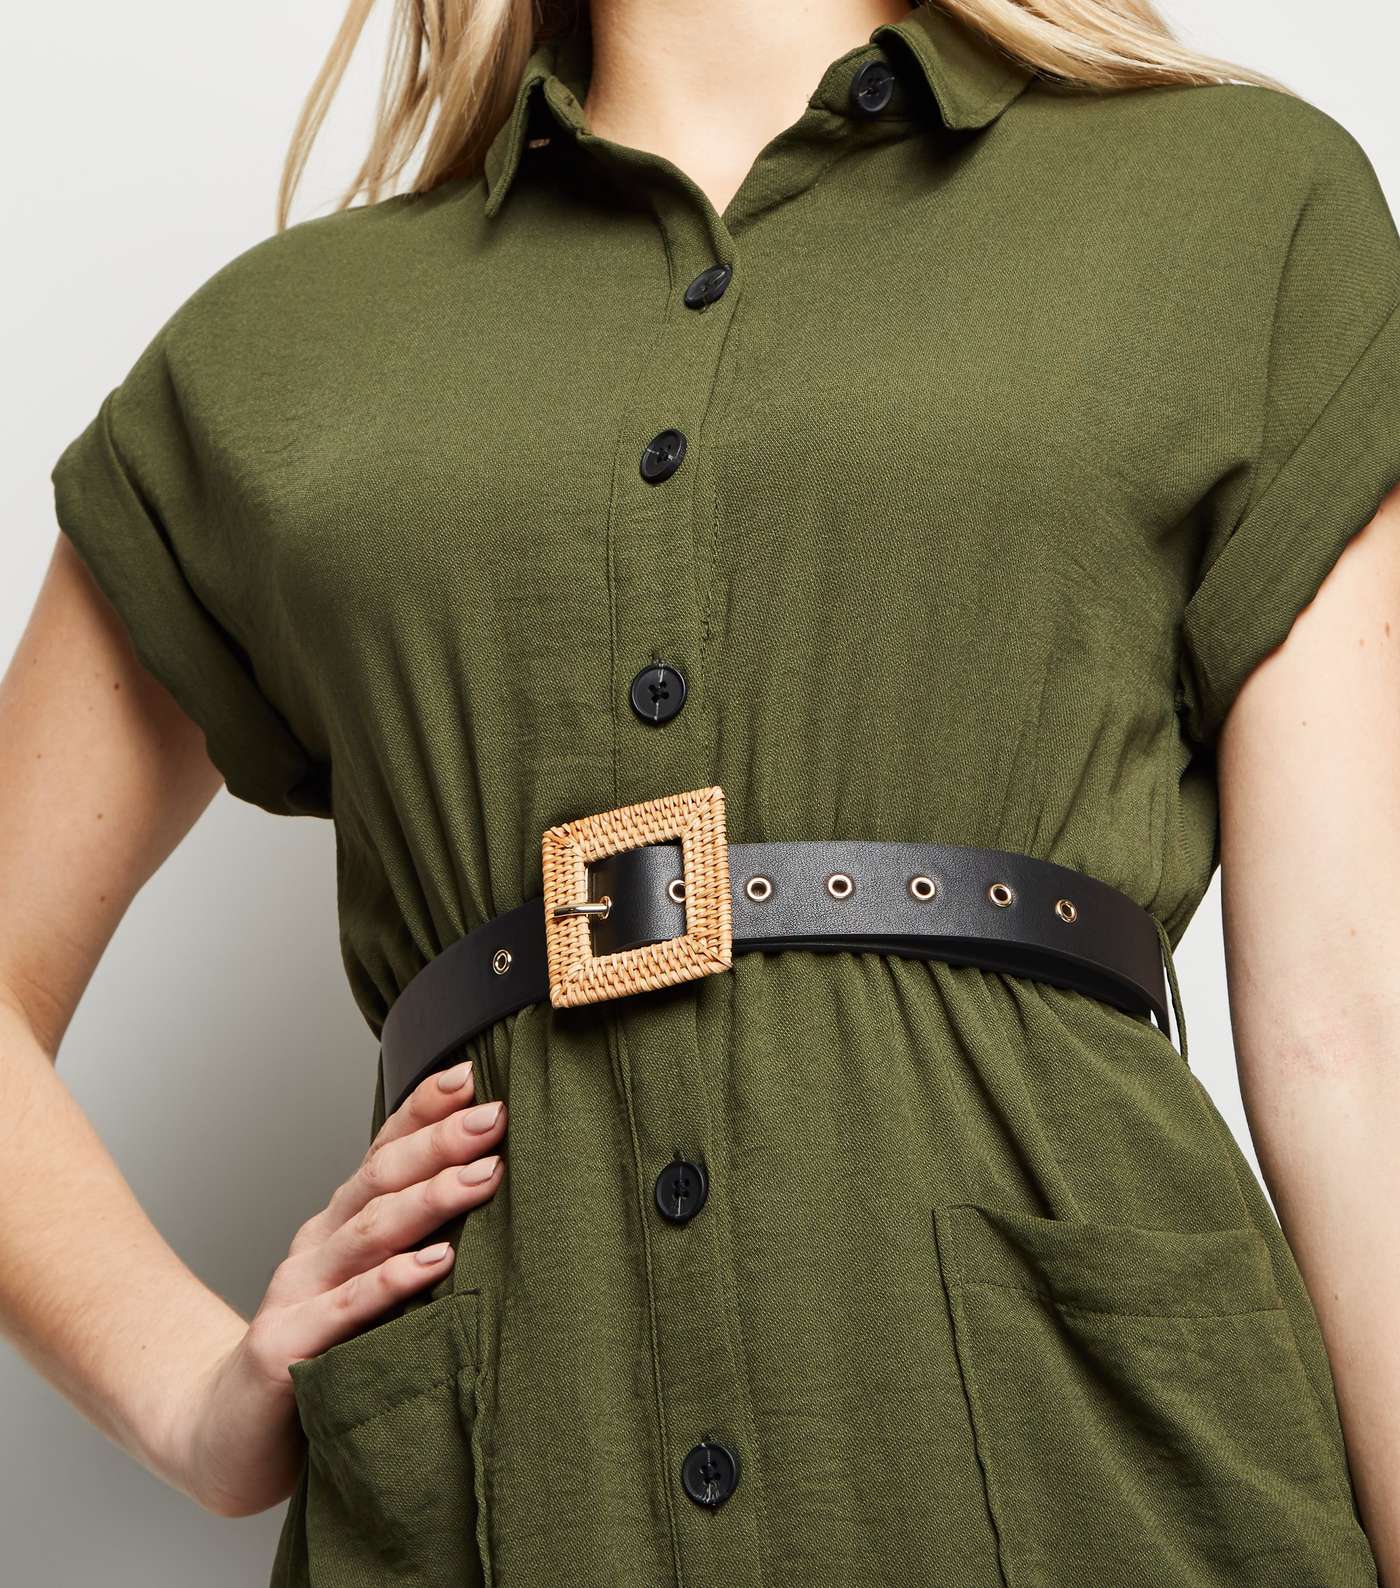 Black Woven Straw Effect Square Buckle Belt